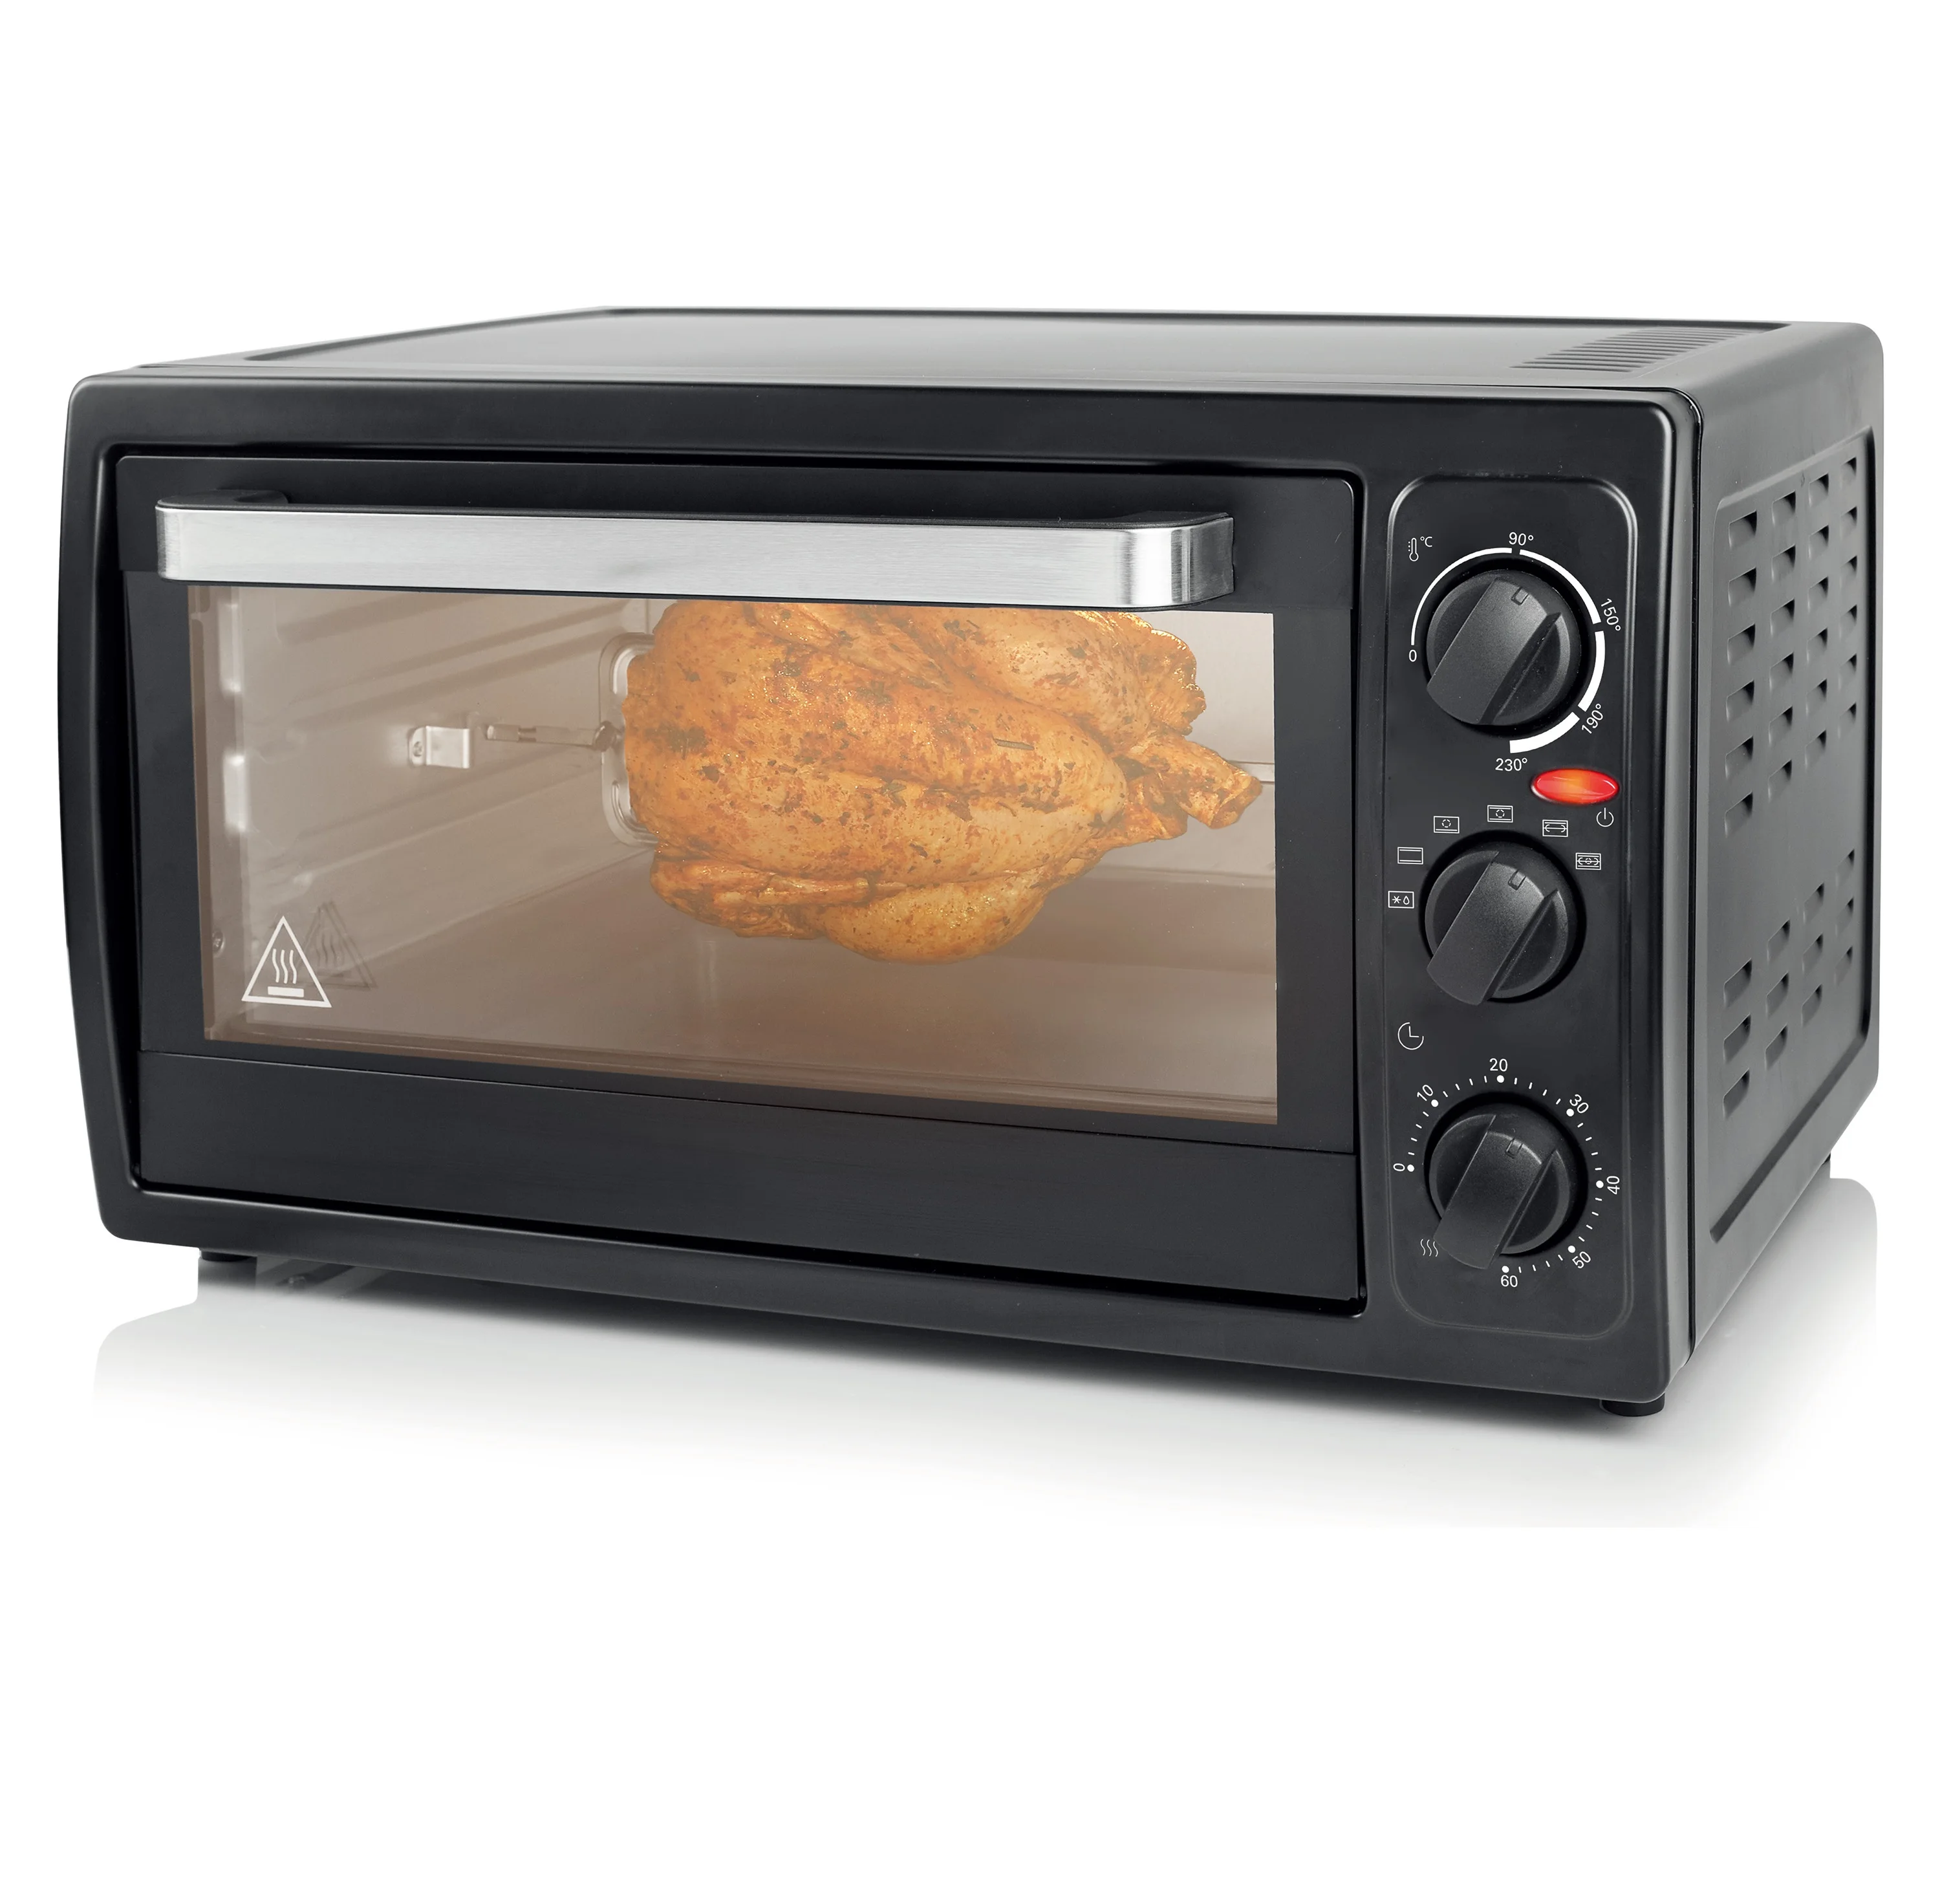 Shinkan vice versa kaart 46l Household Roast Chicken Electric Toaster Oven Convenction Oven Inmertro  - Buy Mini Oven,Toaster Oven,Electric Oven Product on Alibaba.com